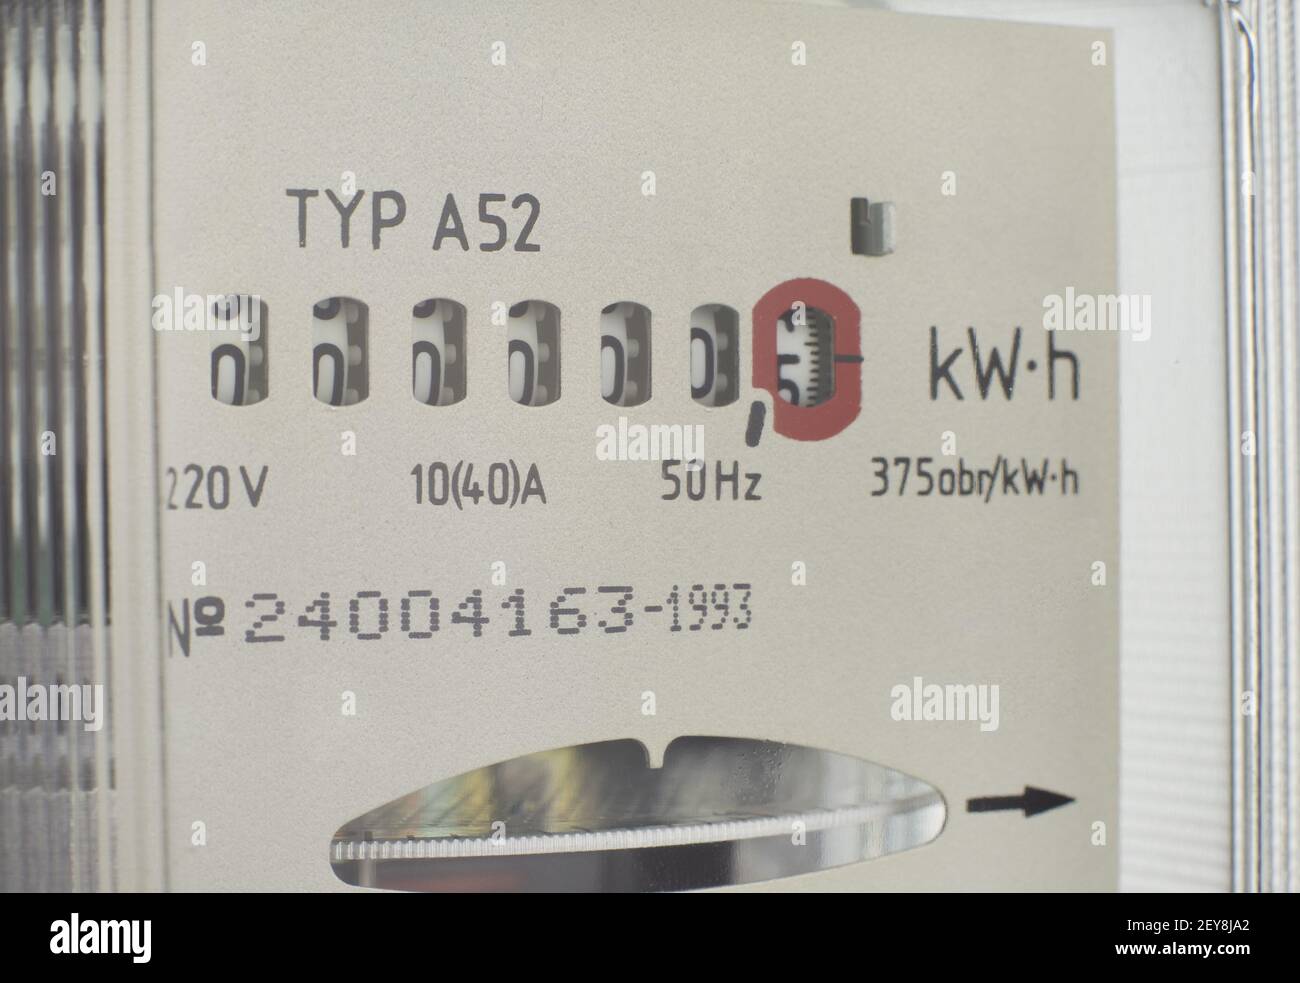 CHICAGO, UNITED STATES - Nov 18, 2020: Electricity meter showing kilowatt hour symbol and measuring dial. Stock Photo